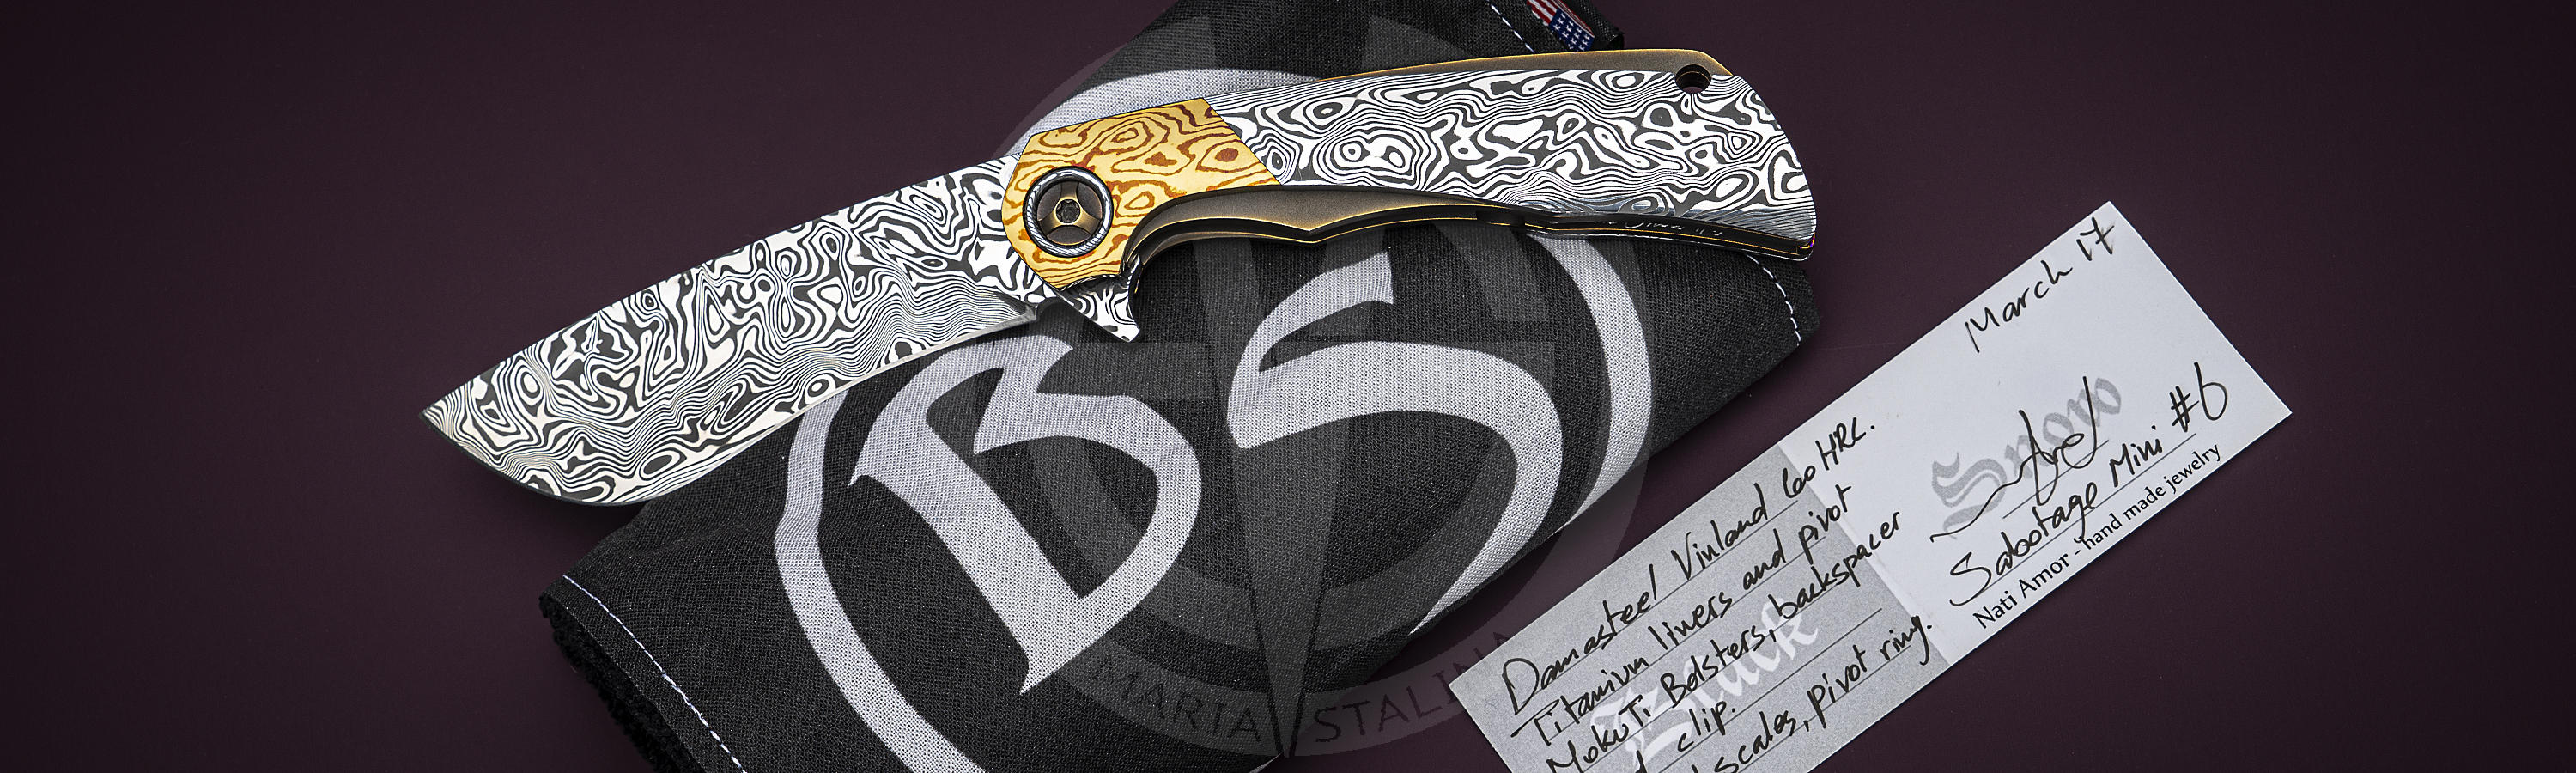 Custom Collectible Knife